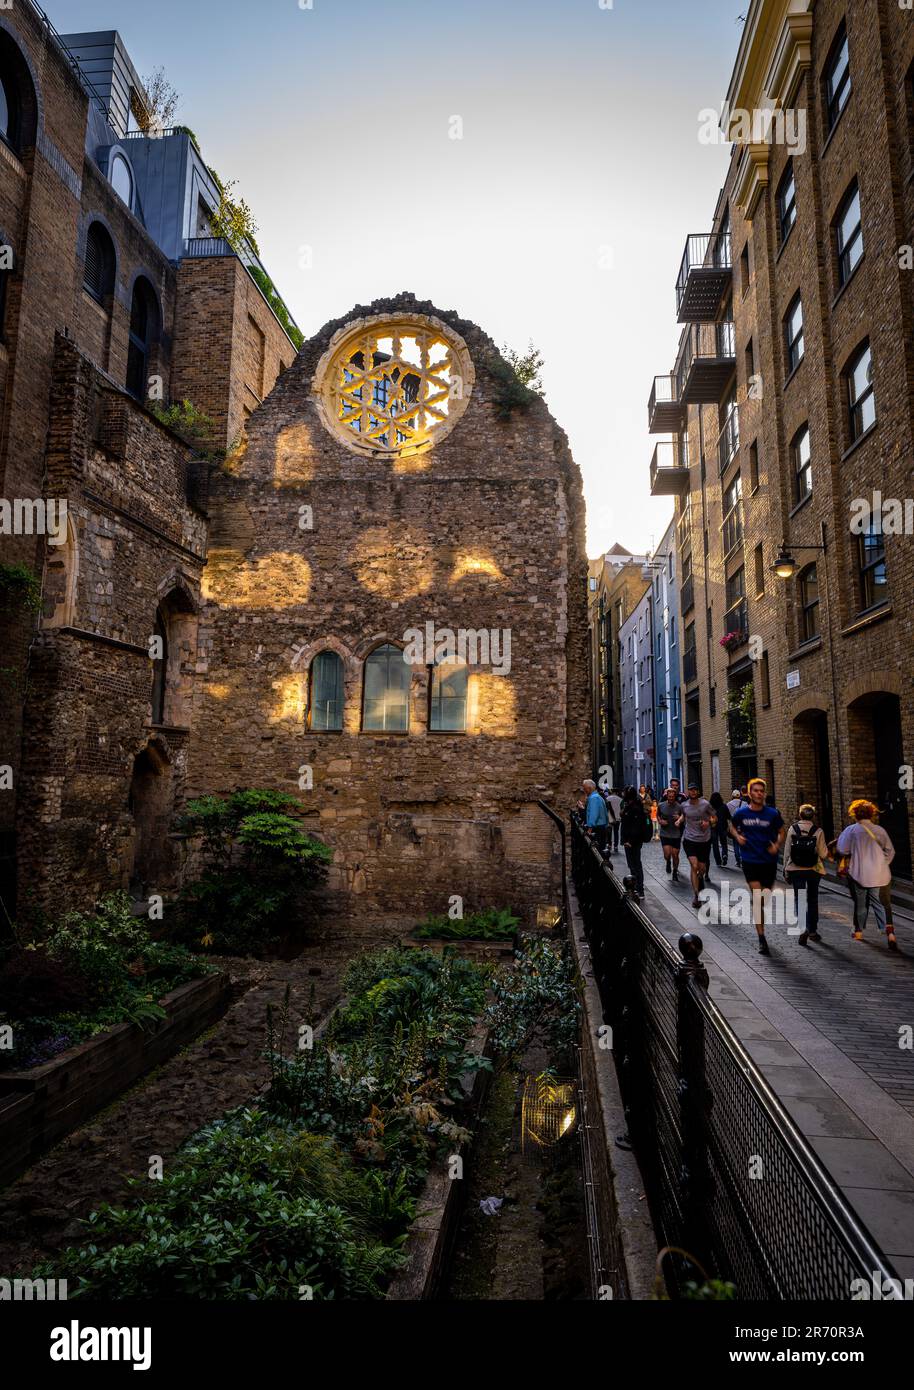 London, UK: Evening view of the ruins of Winchester Palace on Pickfords Wharf in Southwark. These are the remains of the 13th century great hall. Stock Photo